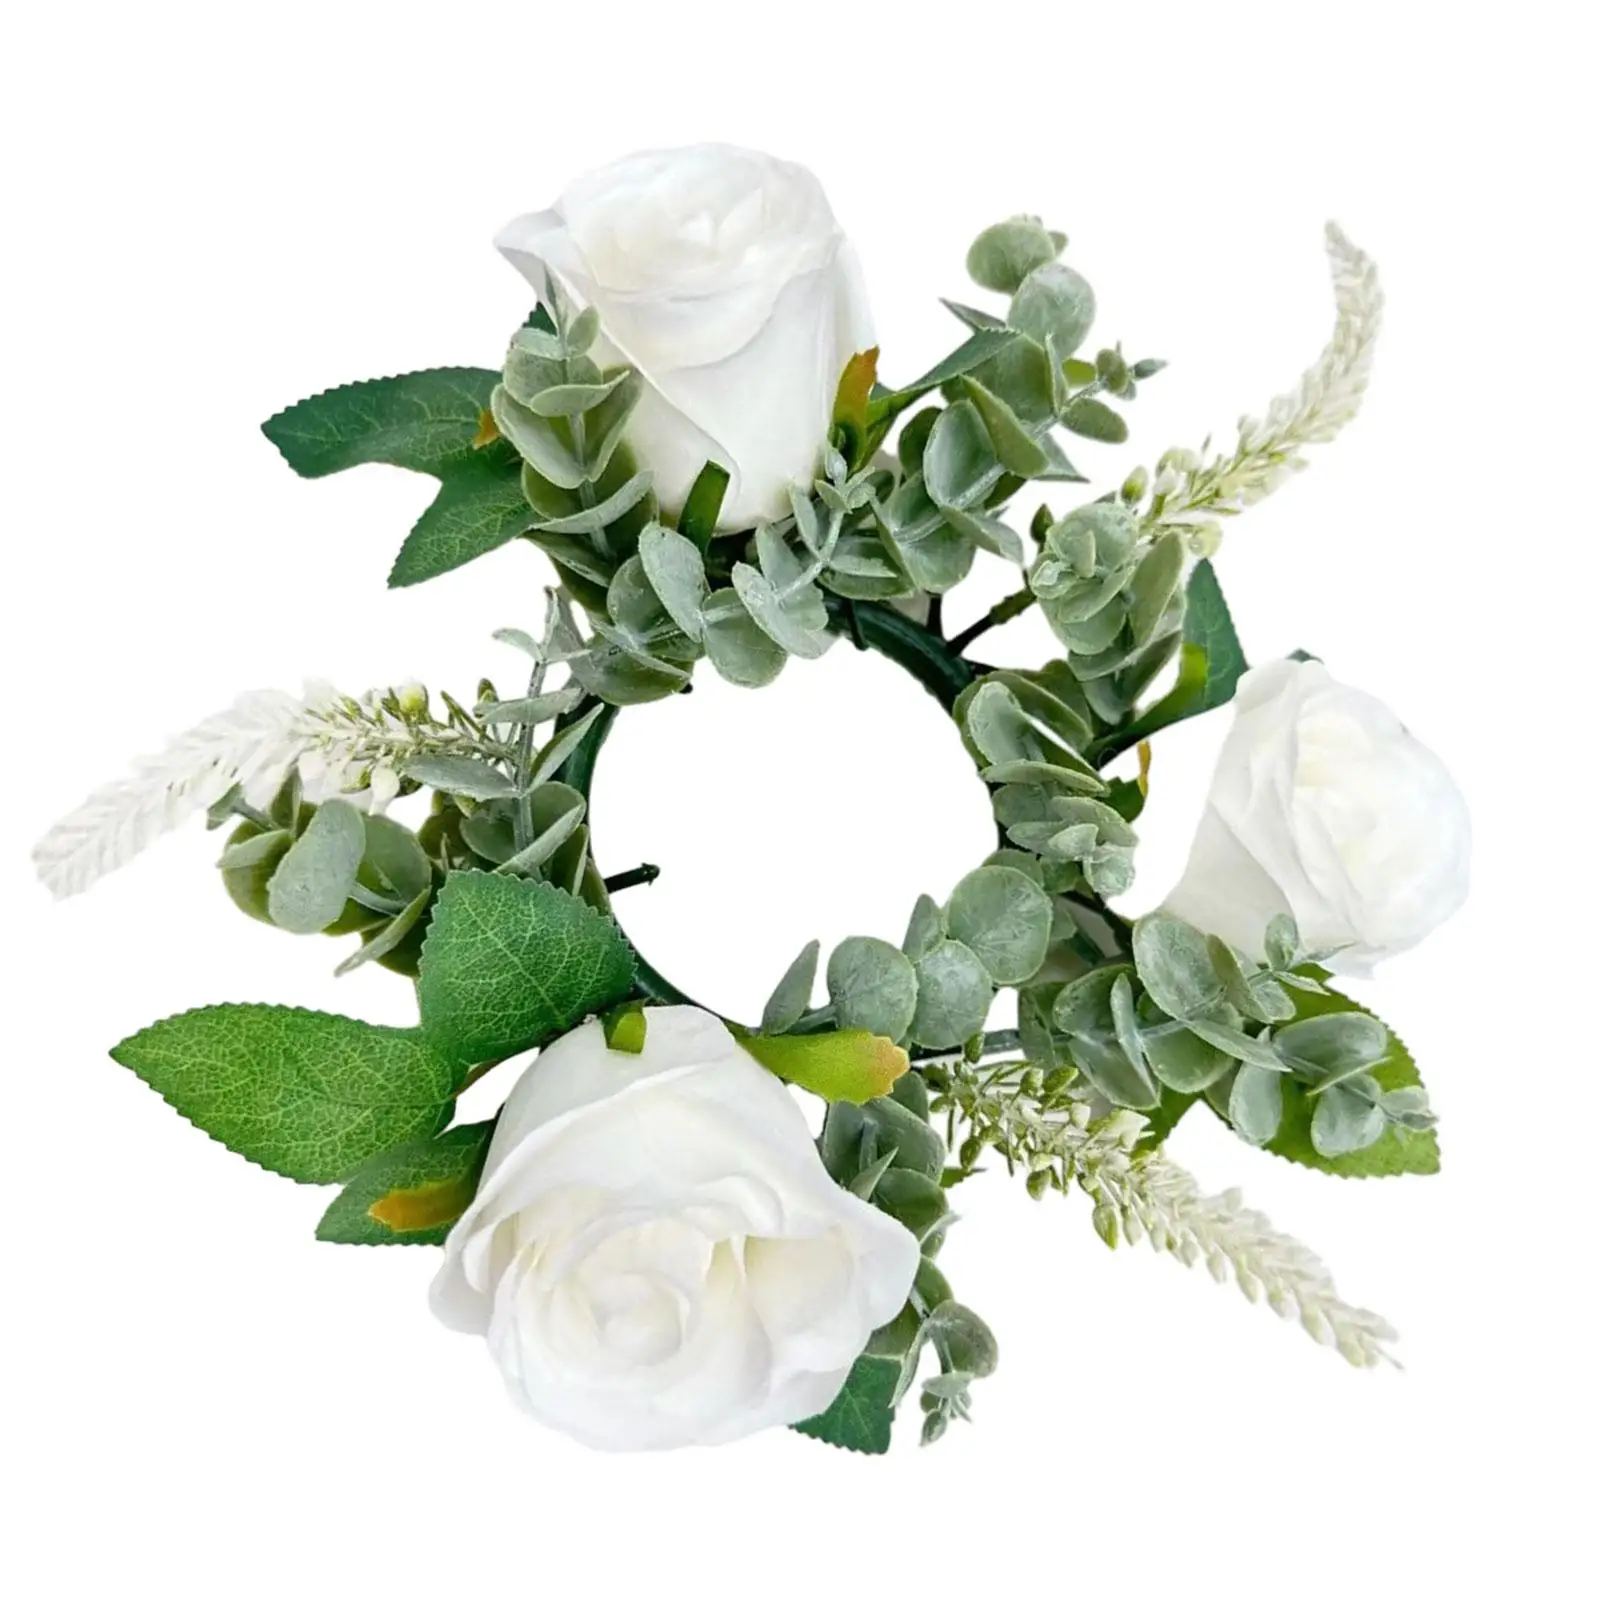 Pillar Candle Rings Wreath 22cm Candlestick Garland Artificial Floral Candle Wreath for Door Kitchen Wedding Home Celebration